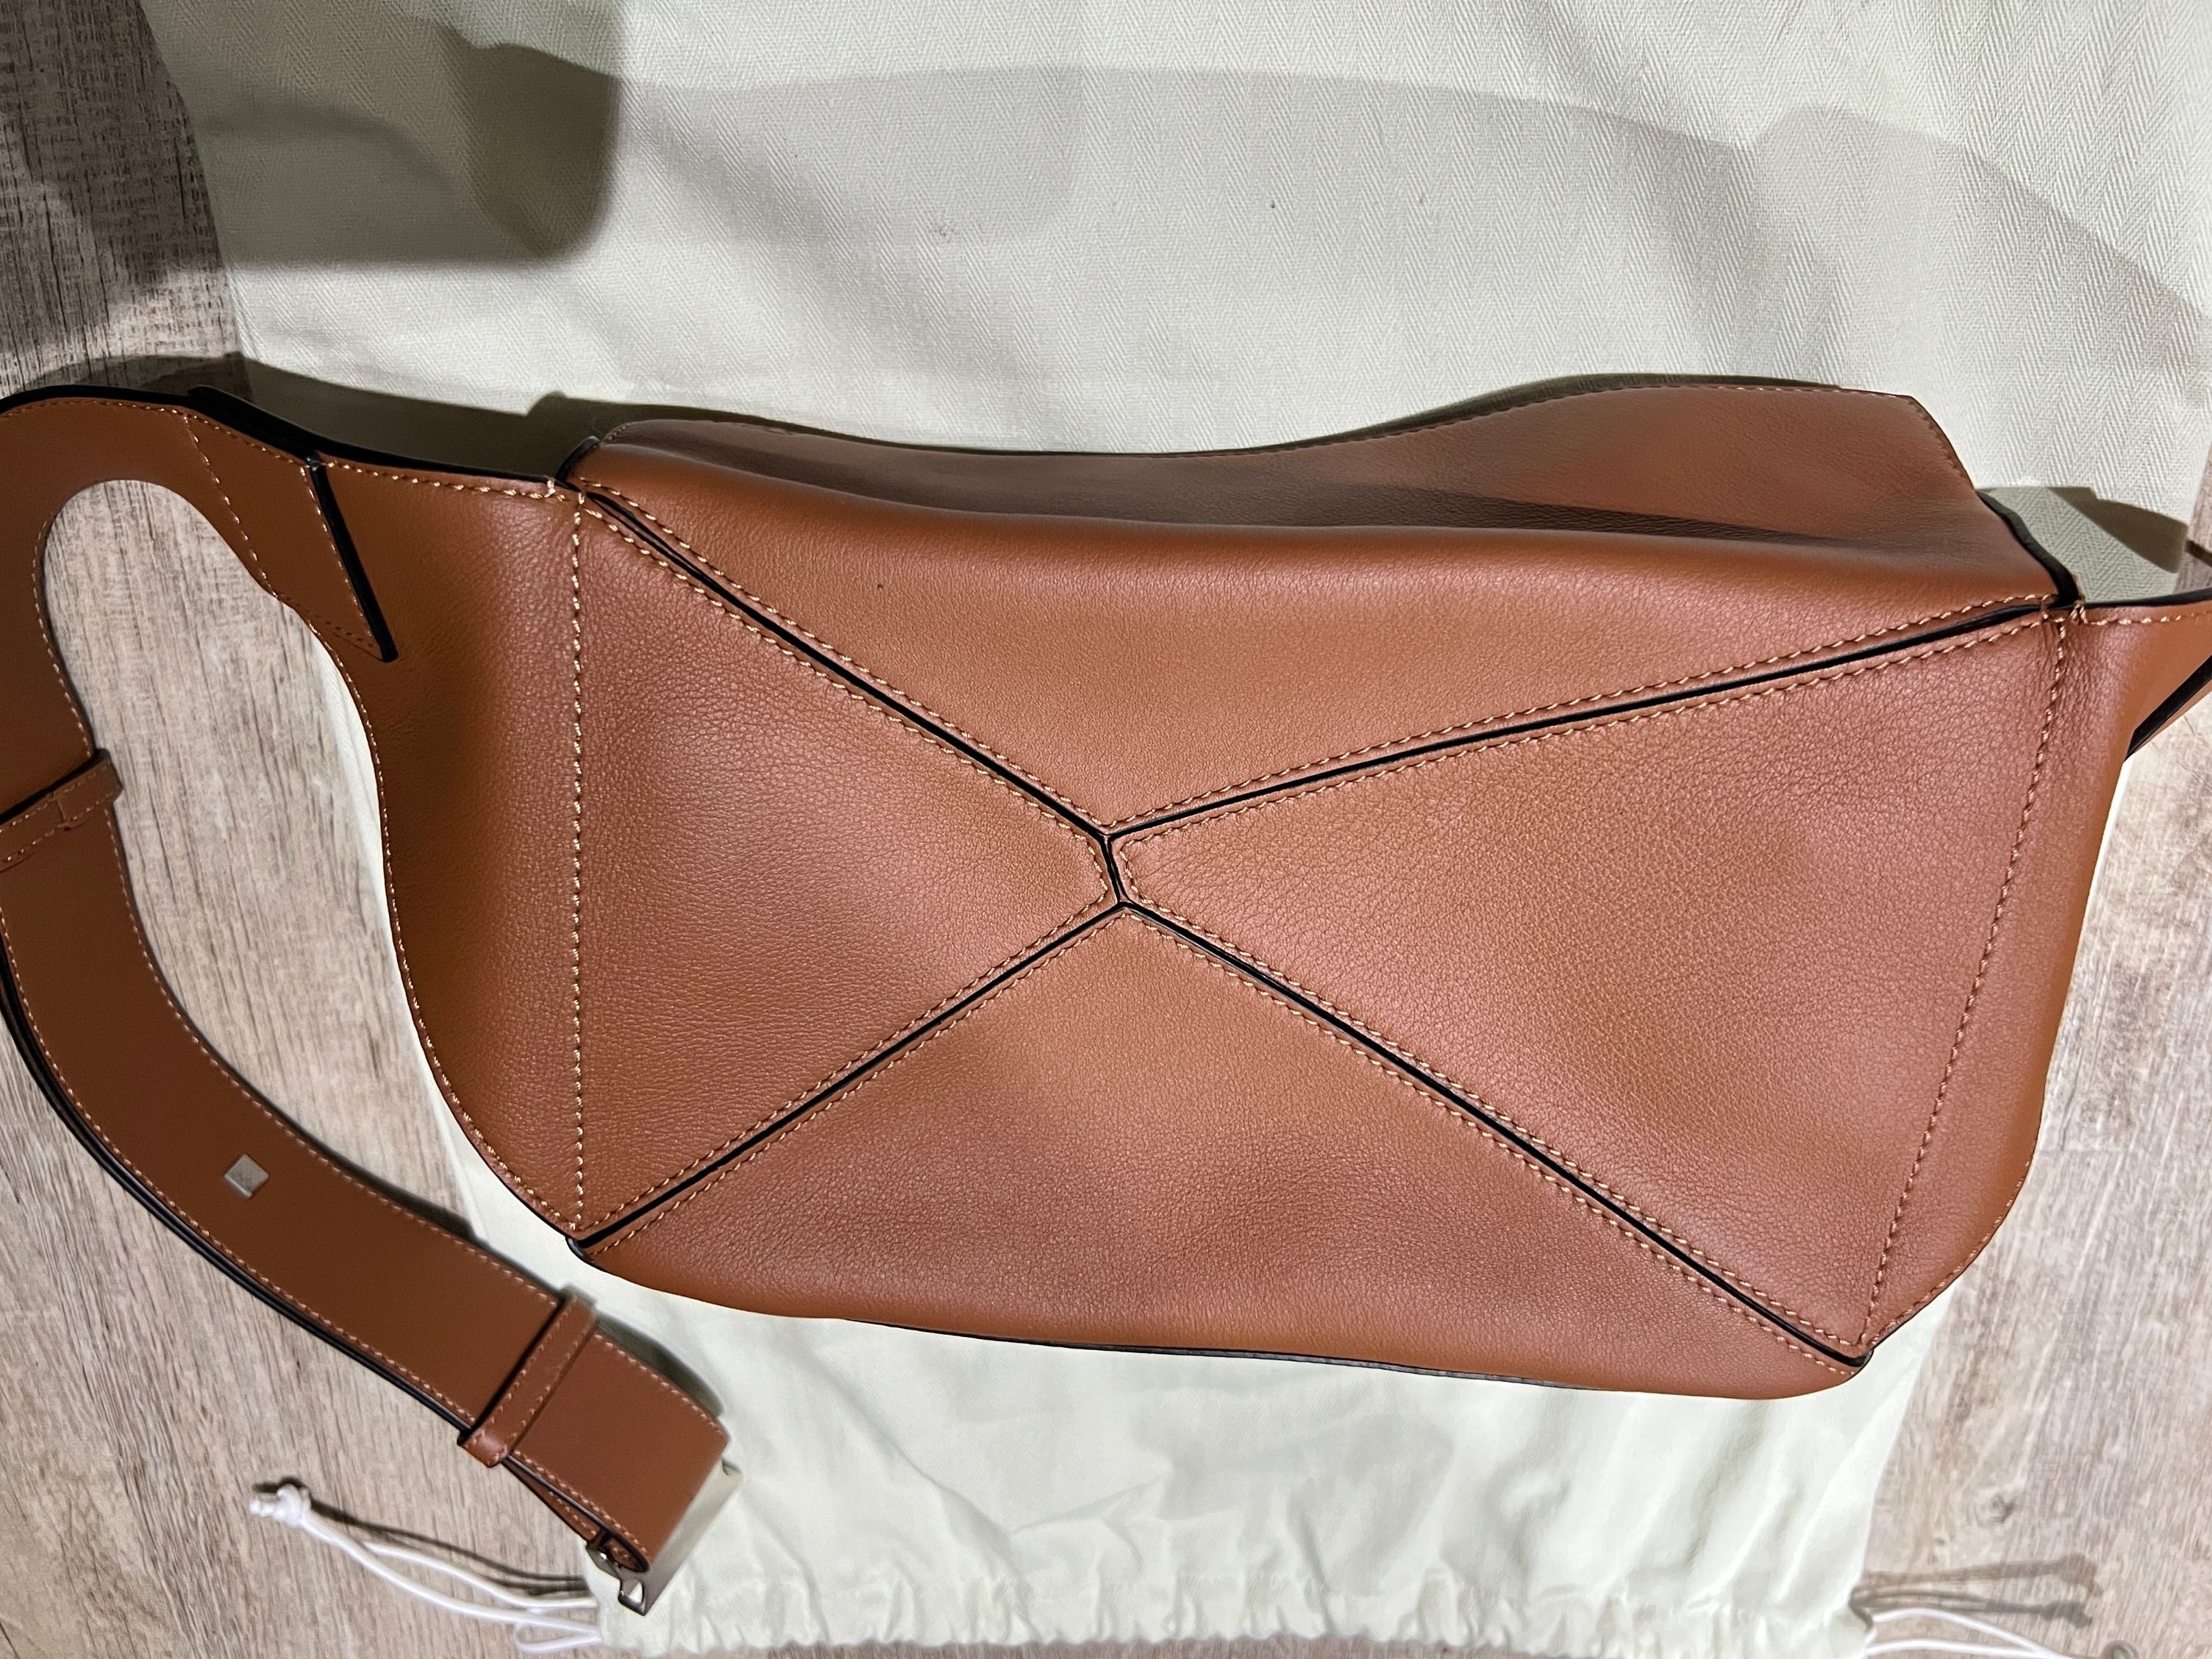 Up For Sale This Beautiful Classic Calfskin Small Tan Loewe Puzzle